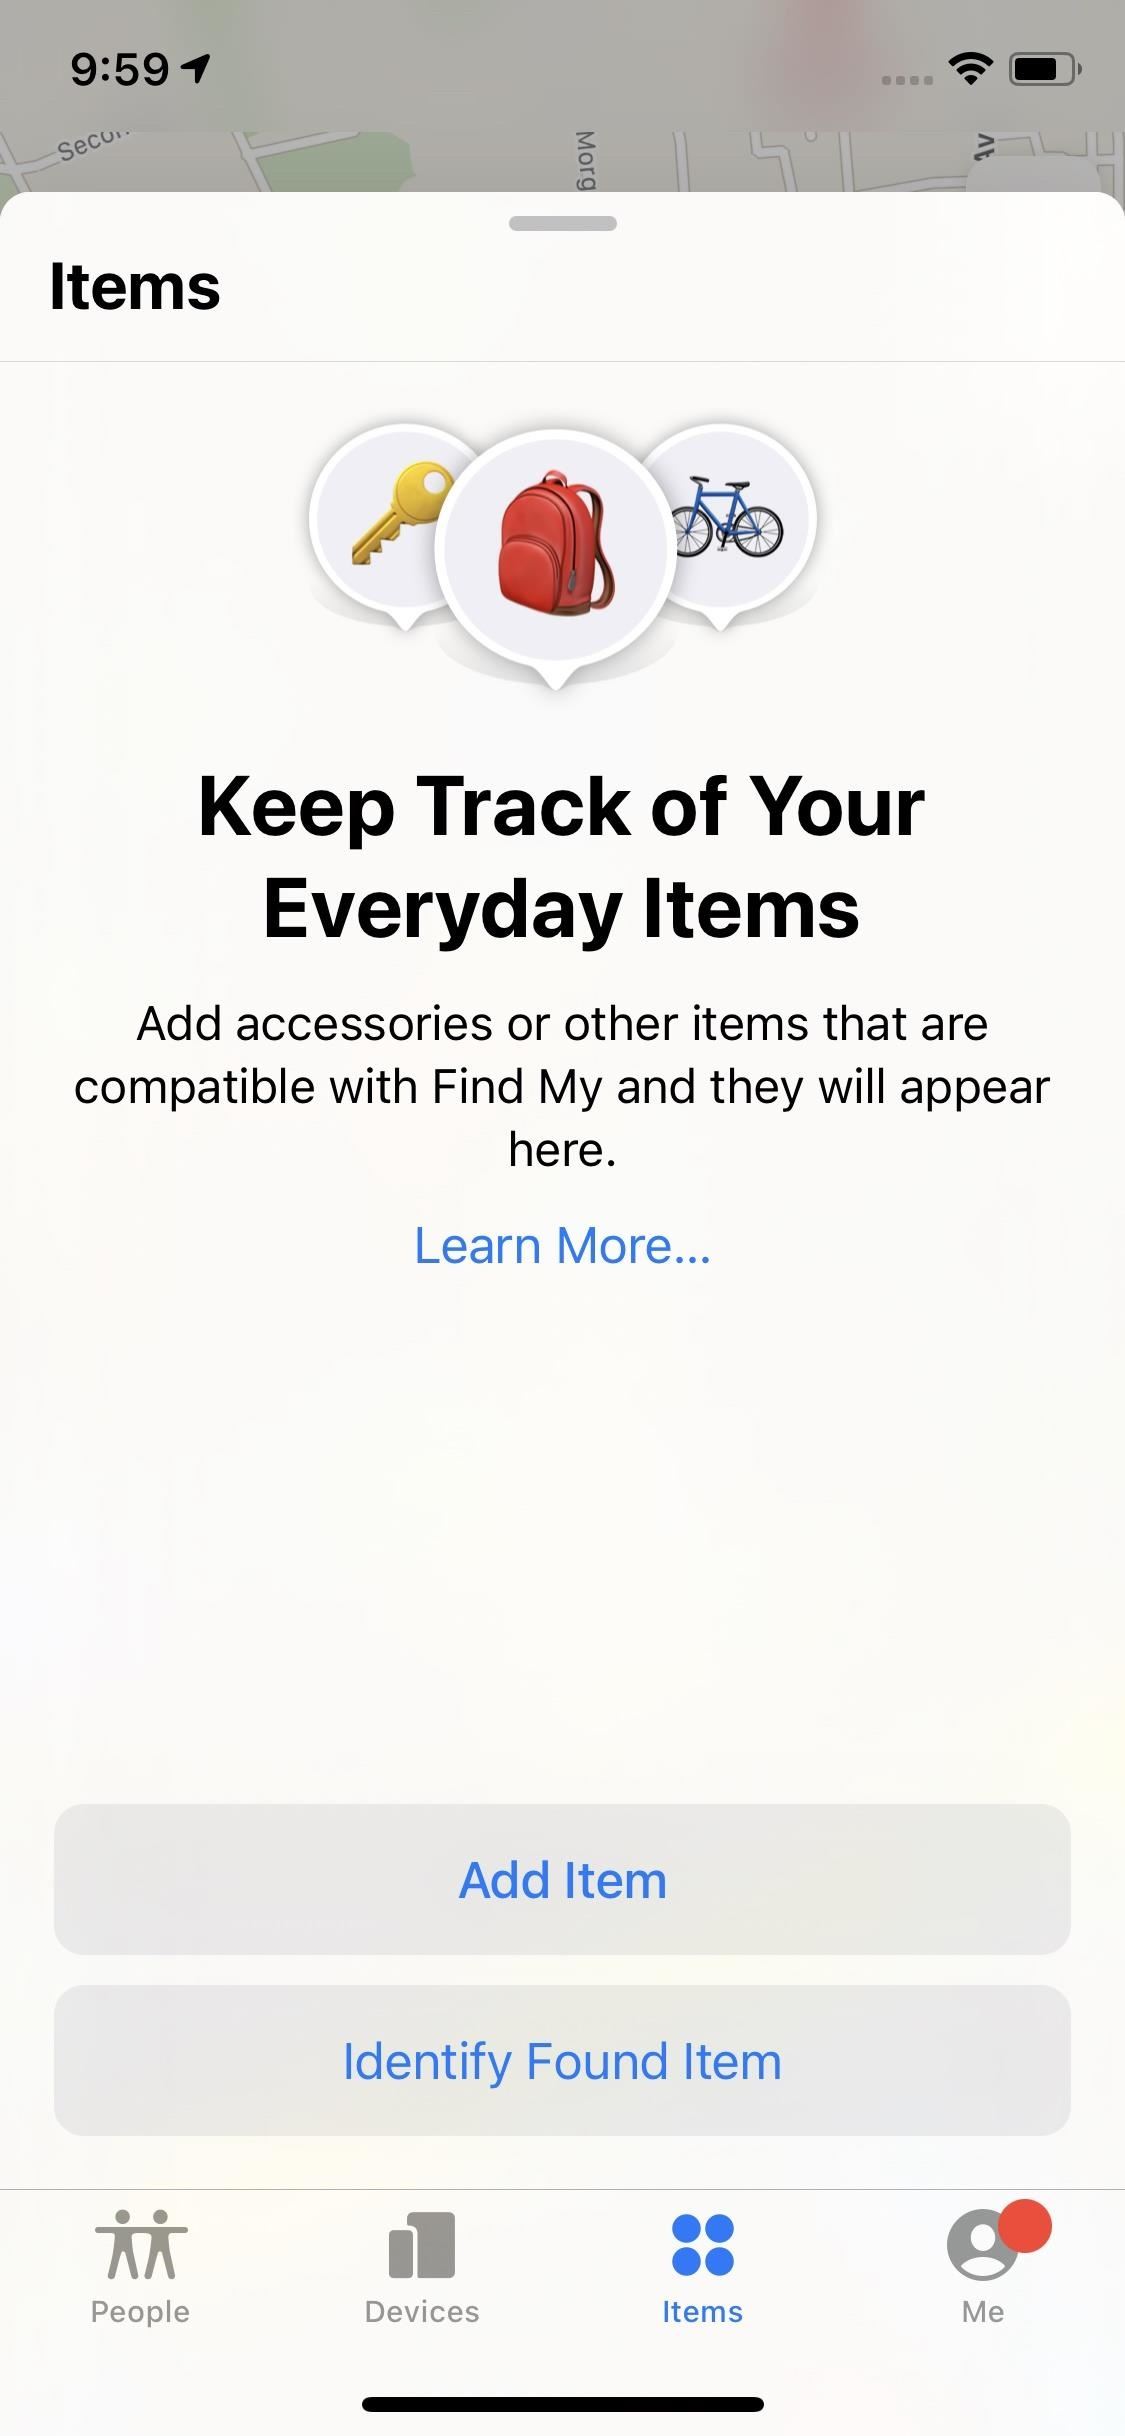 Apple Releases iOS 14.5 Public Beta 3 for iPhone, Adds New 'Items' Tab in Find My